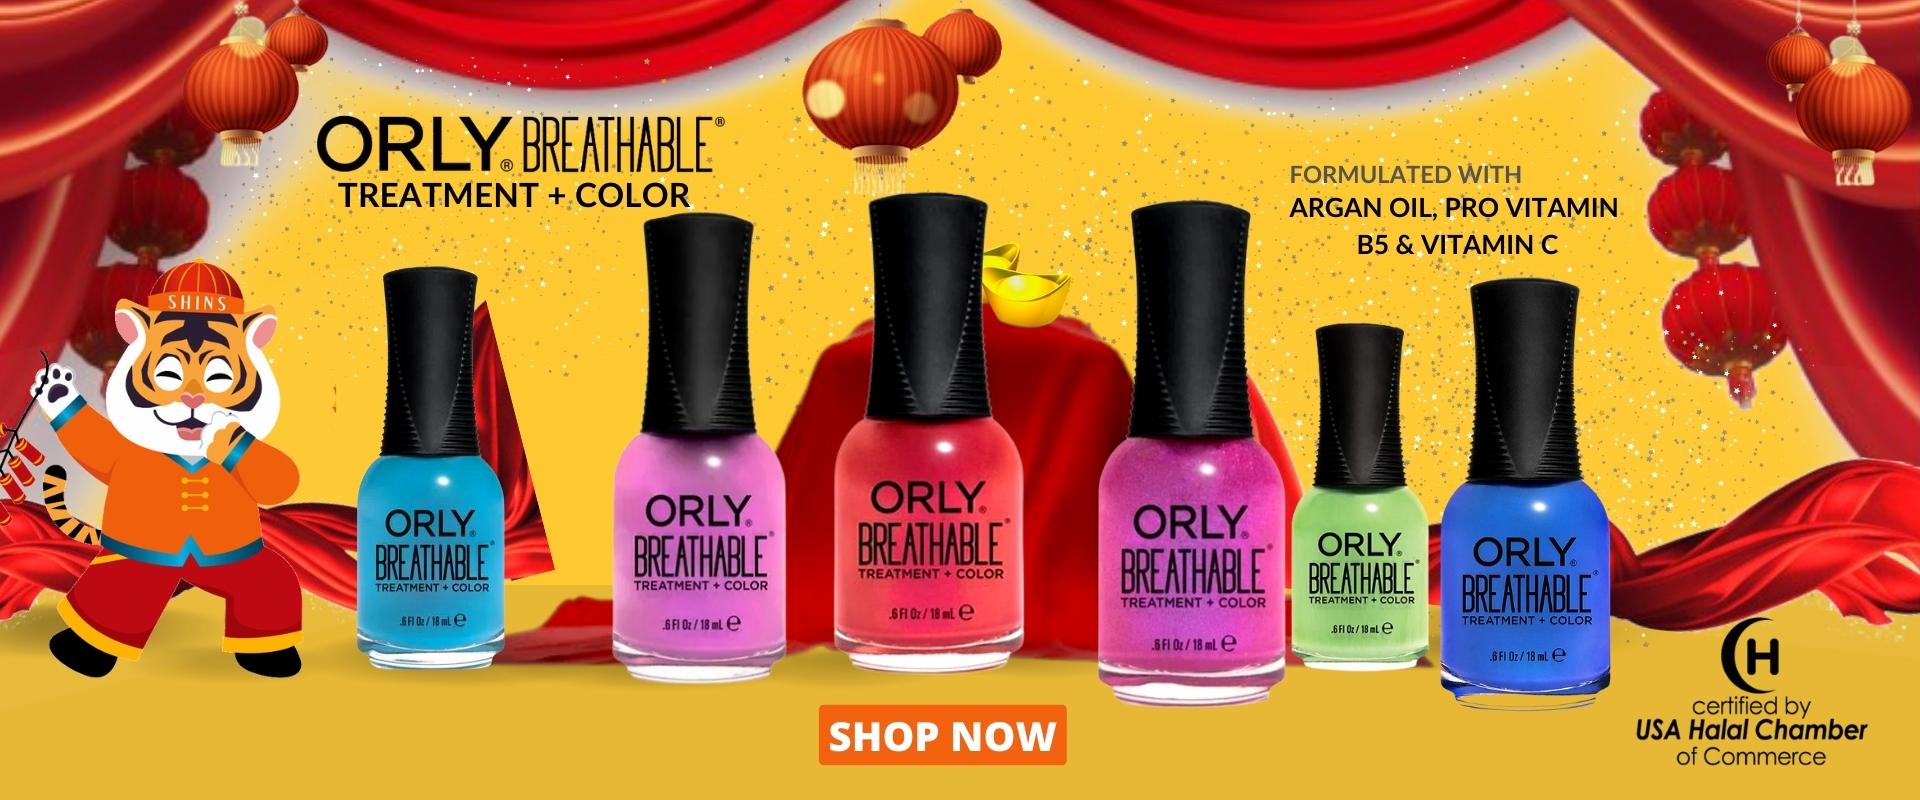 Orly CNY banner